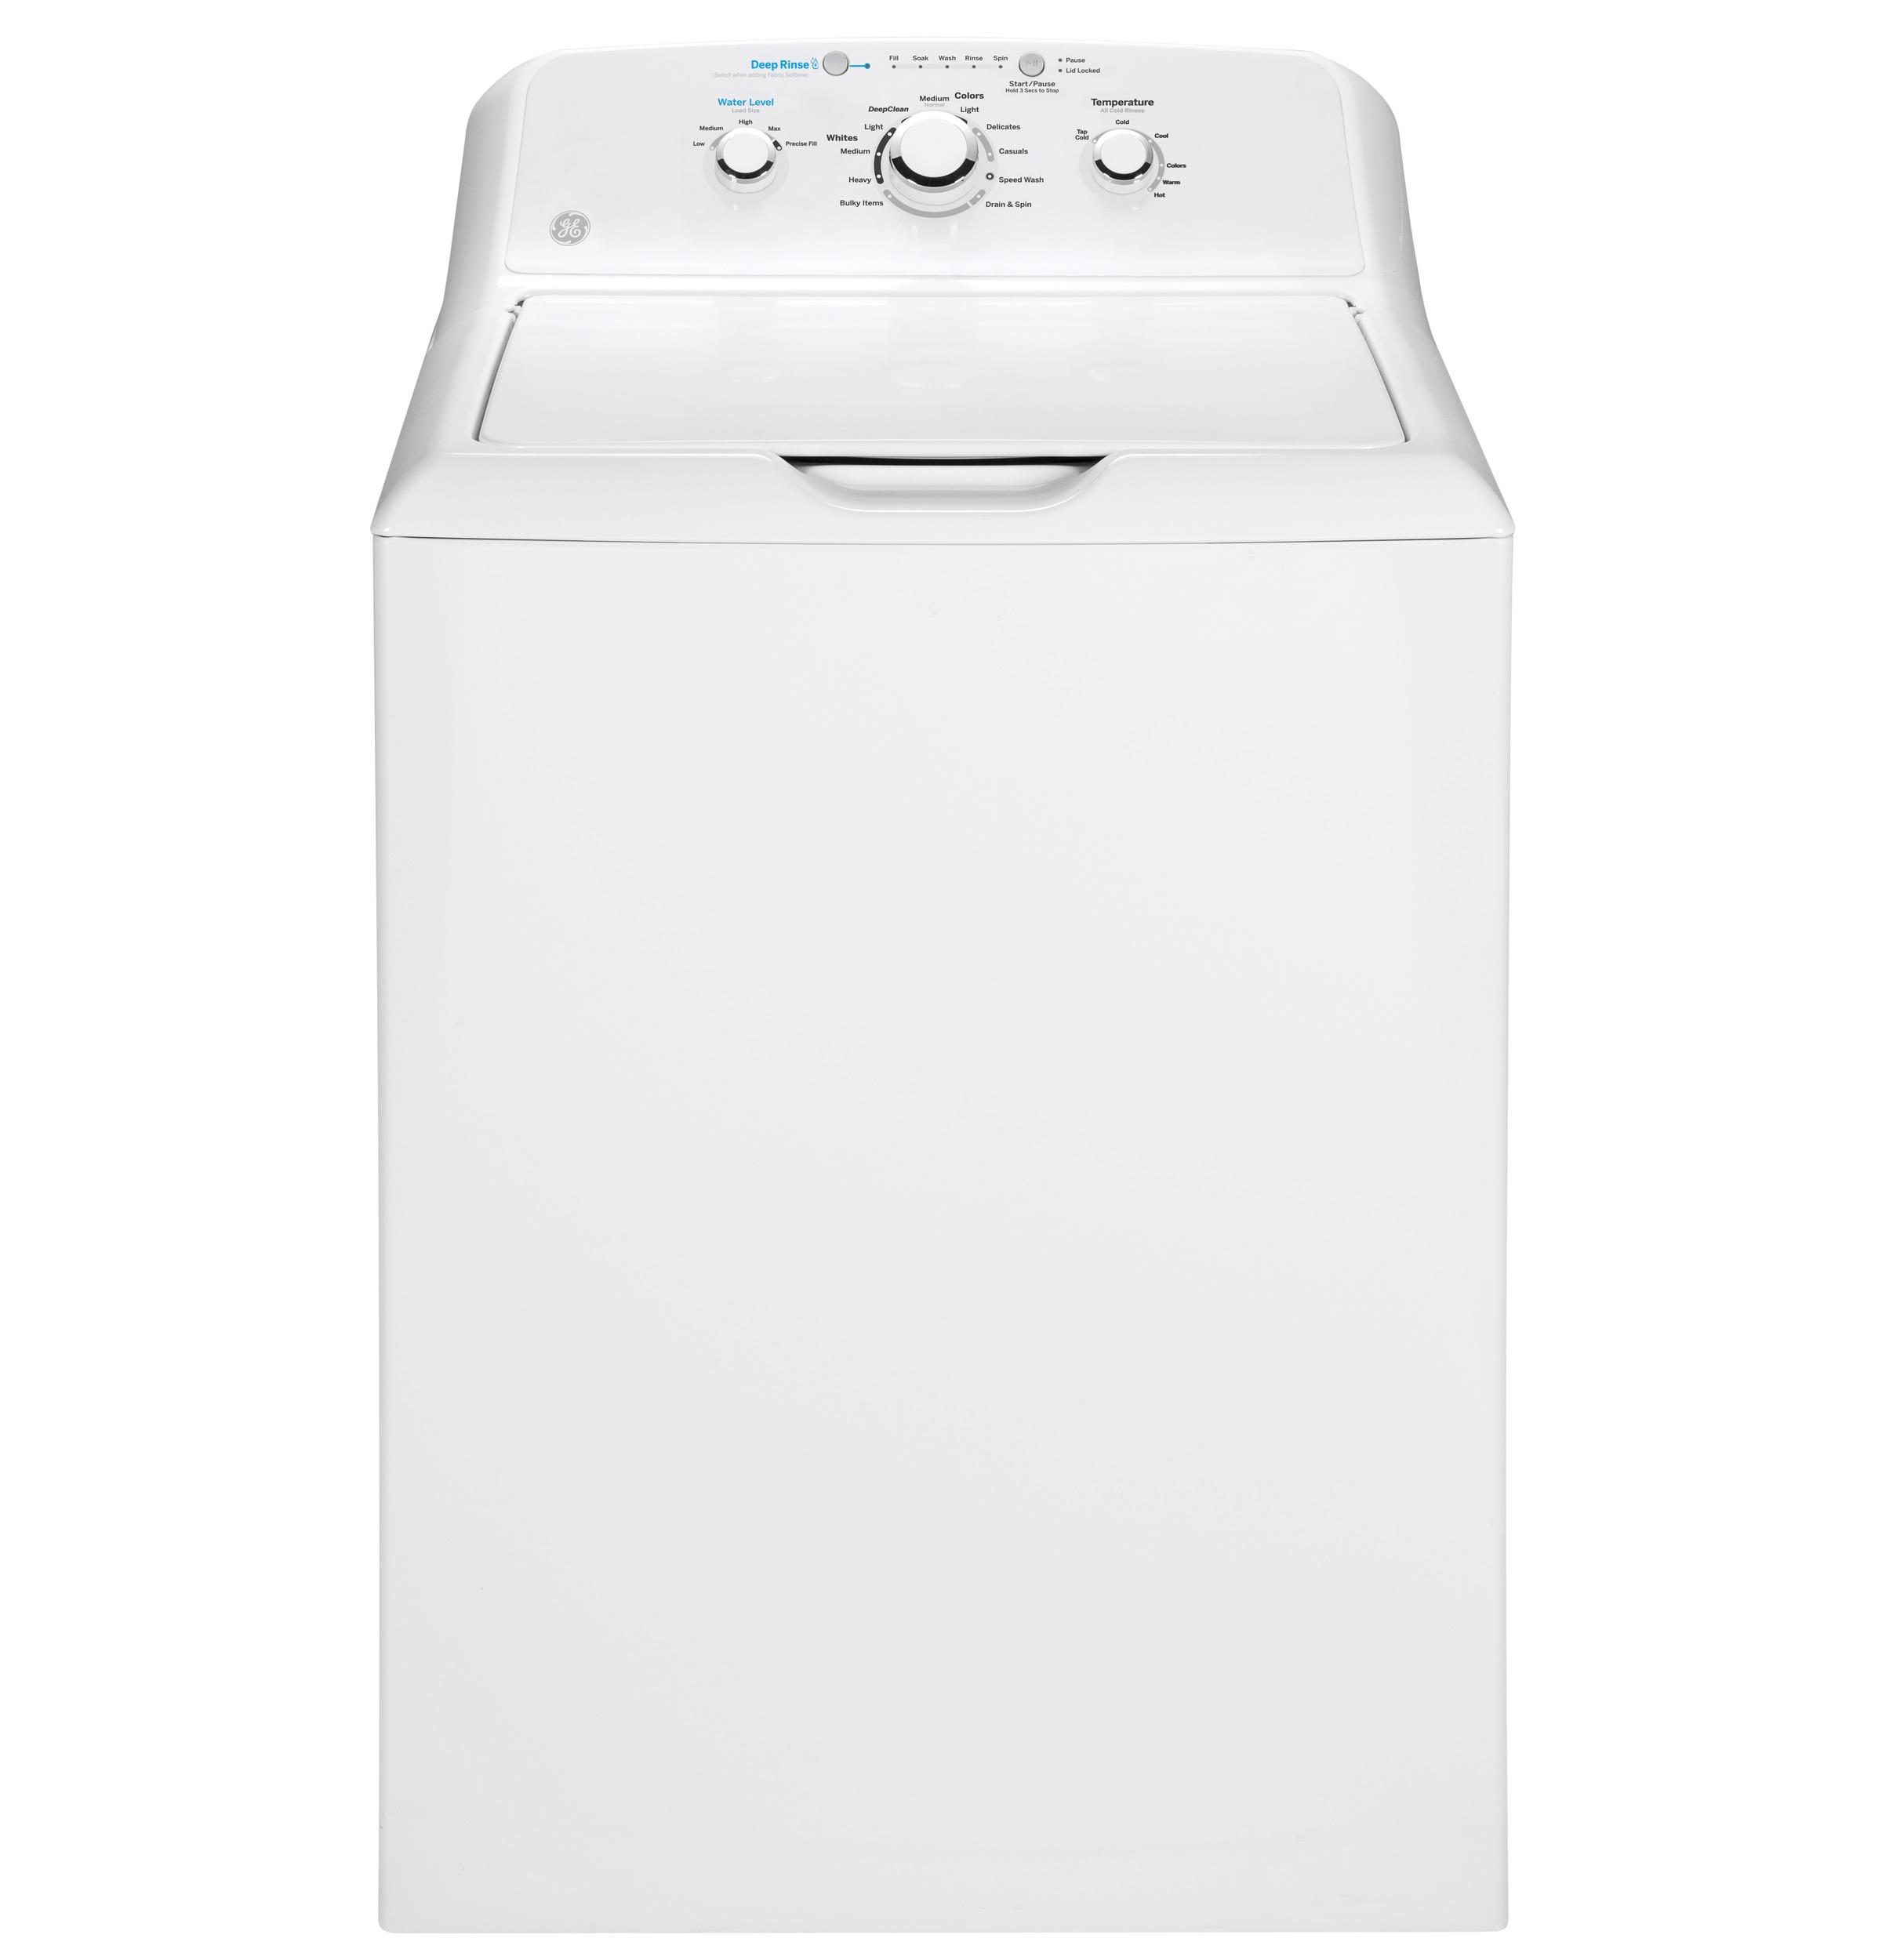 GE® Appliances 4.2 cu. ft. Capacity Washer Top Load with Stainless Steel Basket model GTW335ASNWW - image 1 of 5